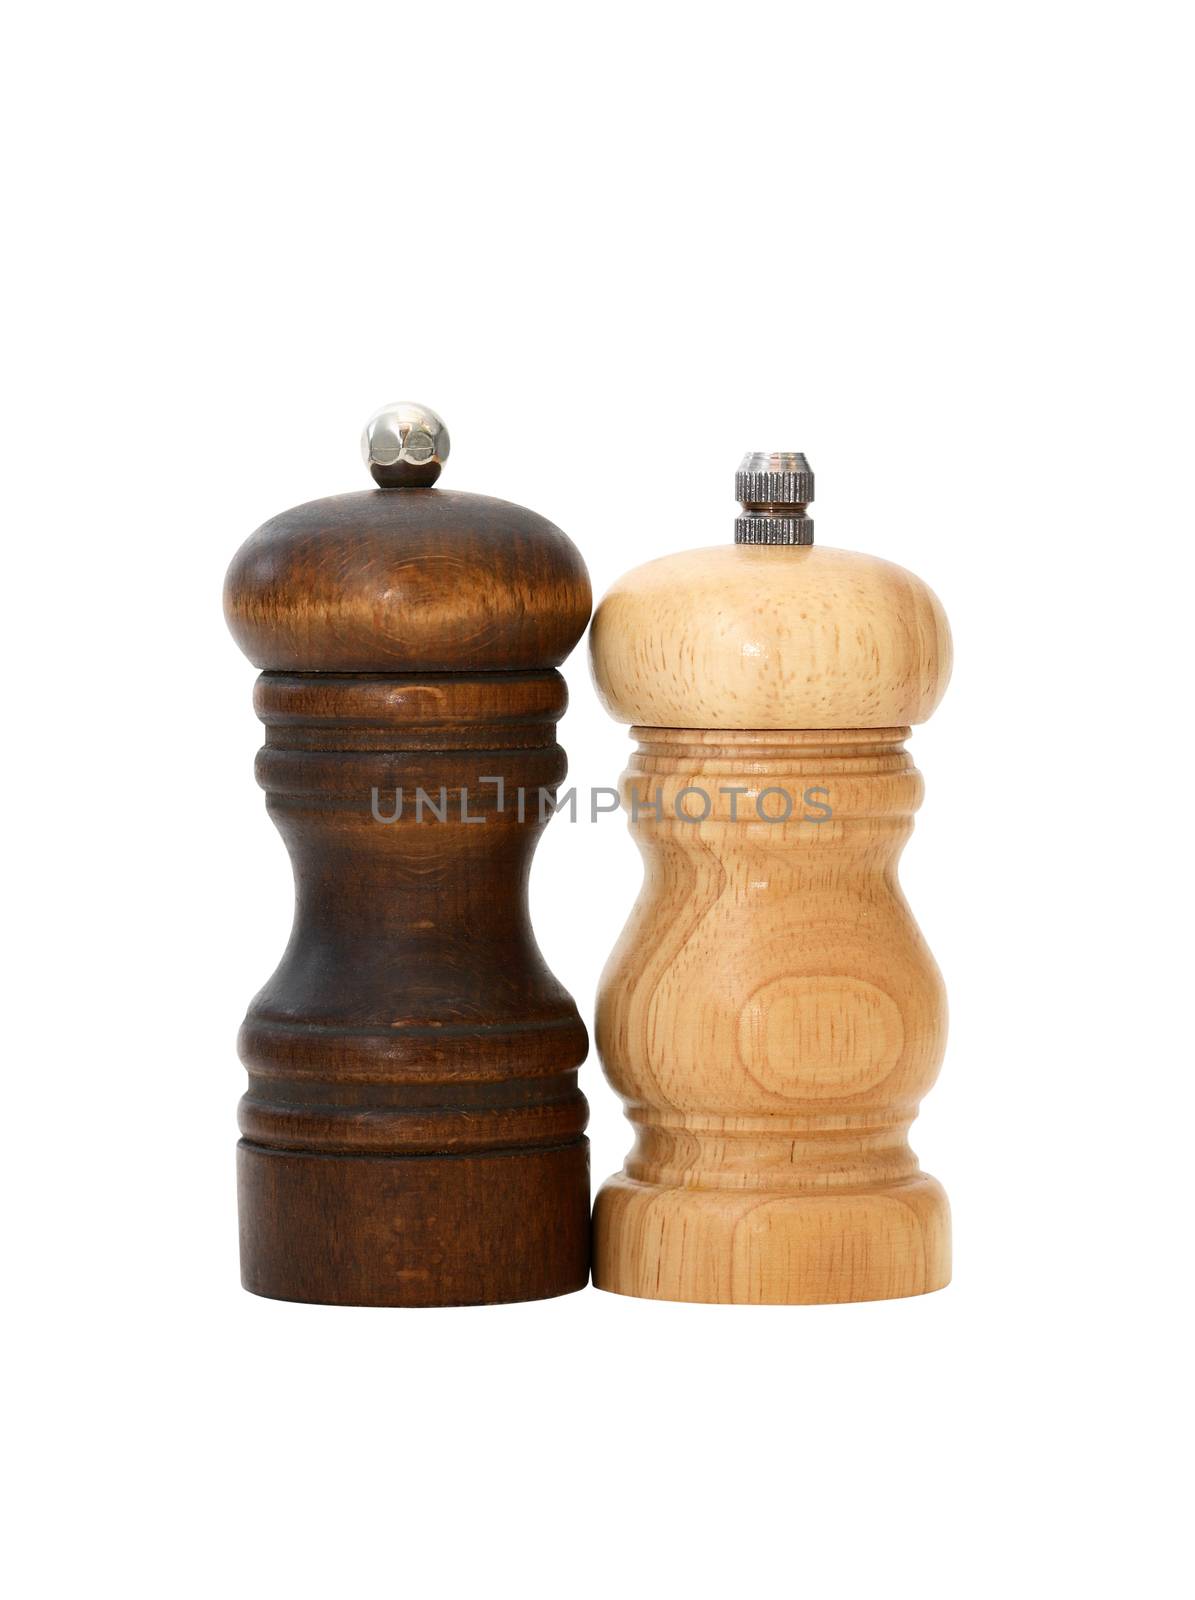 Pair of vintage wooden pepper mills on white background. Isolated with clipping path